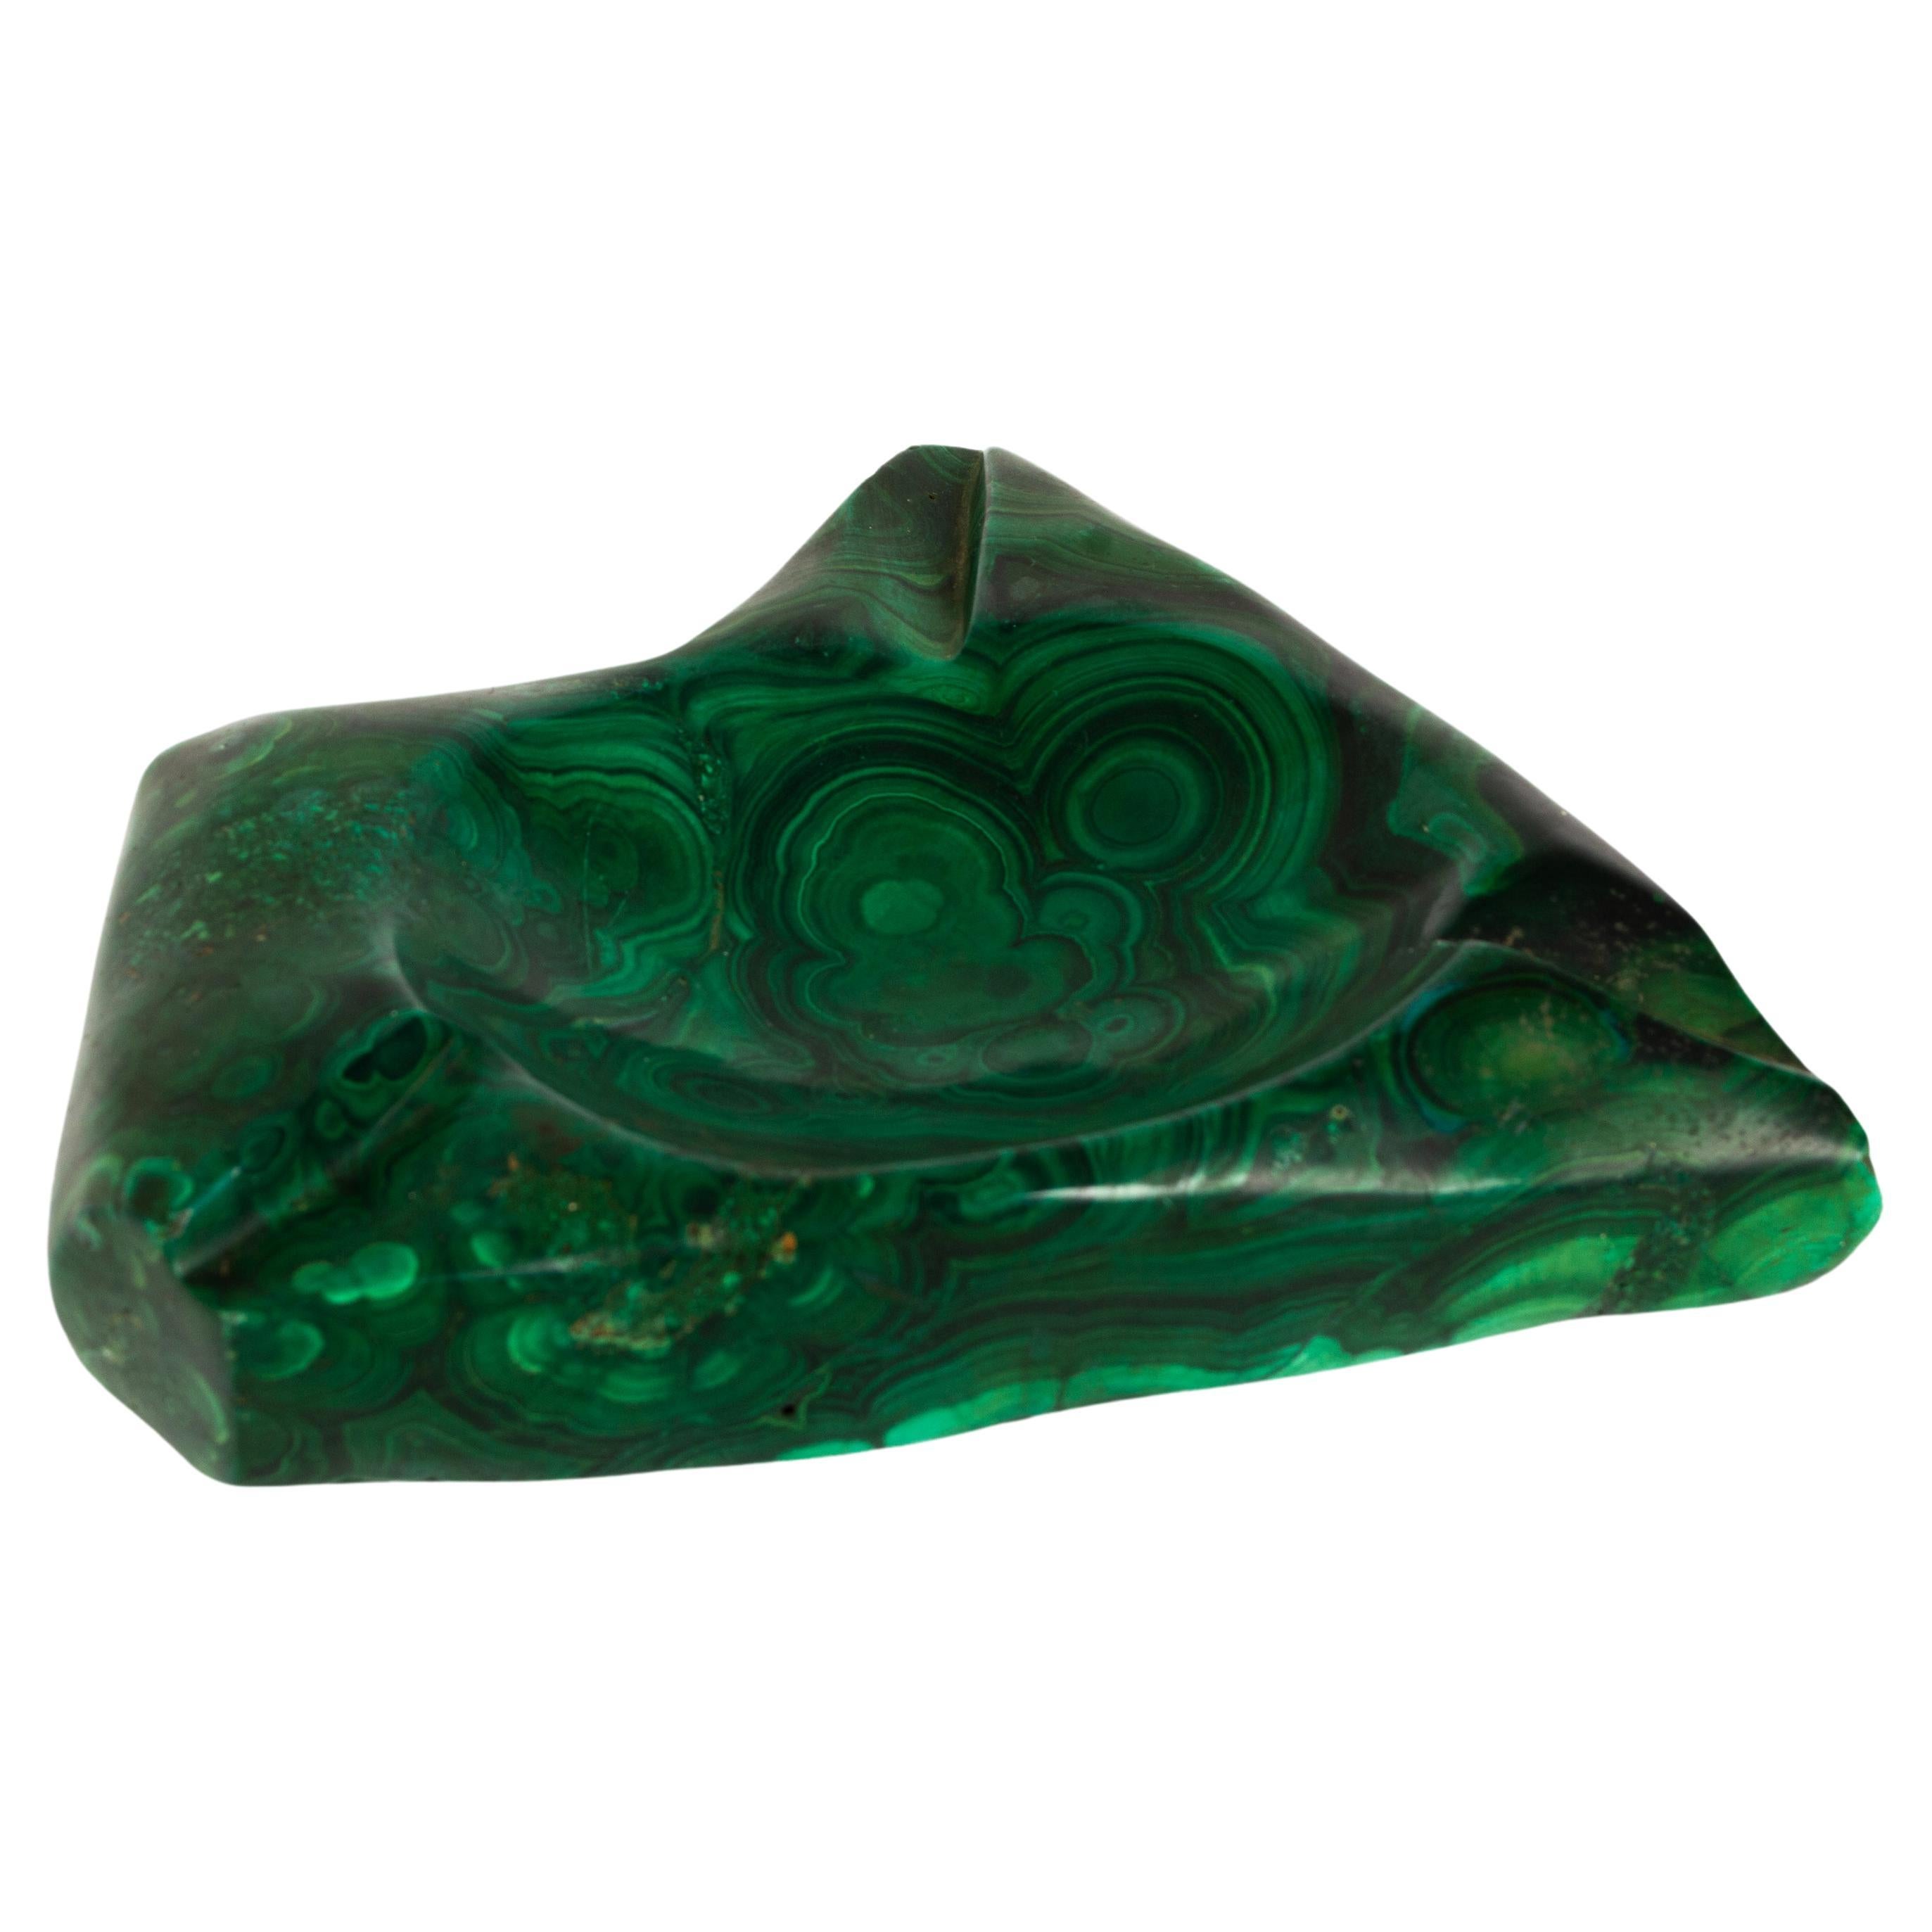 Large Vintage malachite natural stone vide poche trinket dish Italy, C.1960

A substantial piece of all natural malachite mineral stone. Polished beautifully to depict the natural pattern formation of this stunning rock. 
In excellent condition